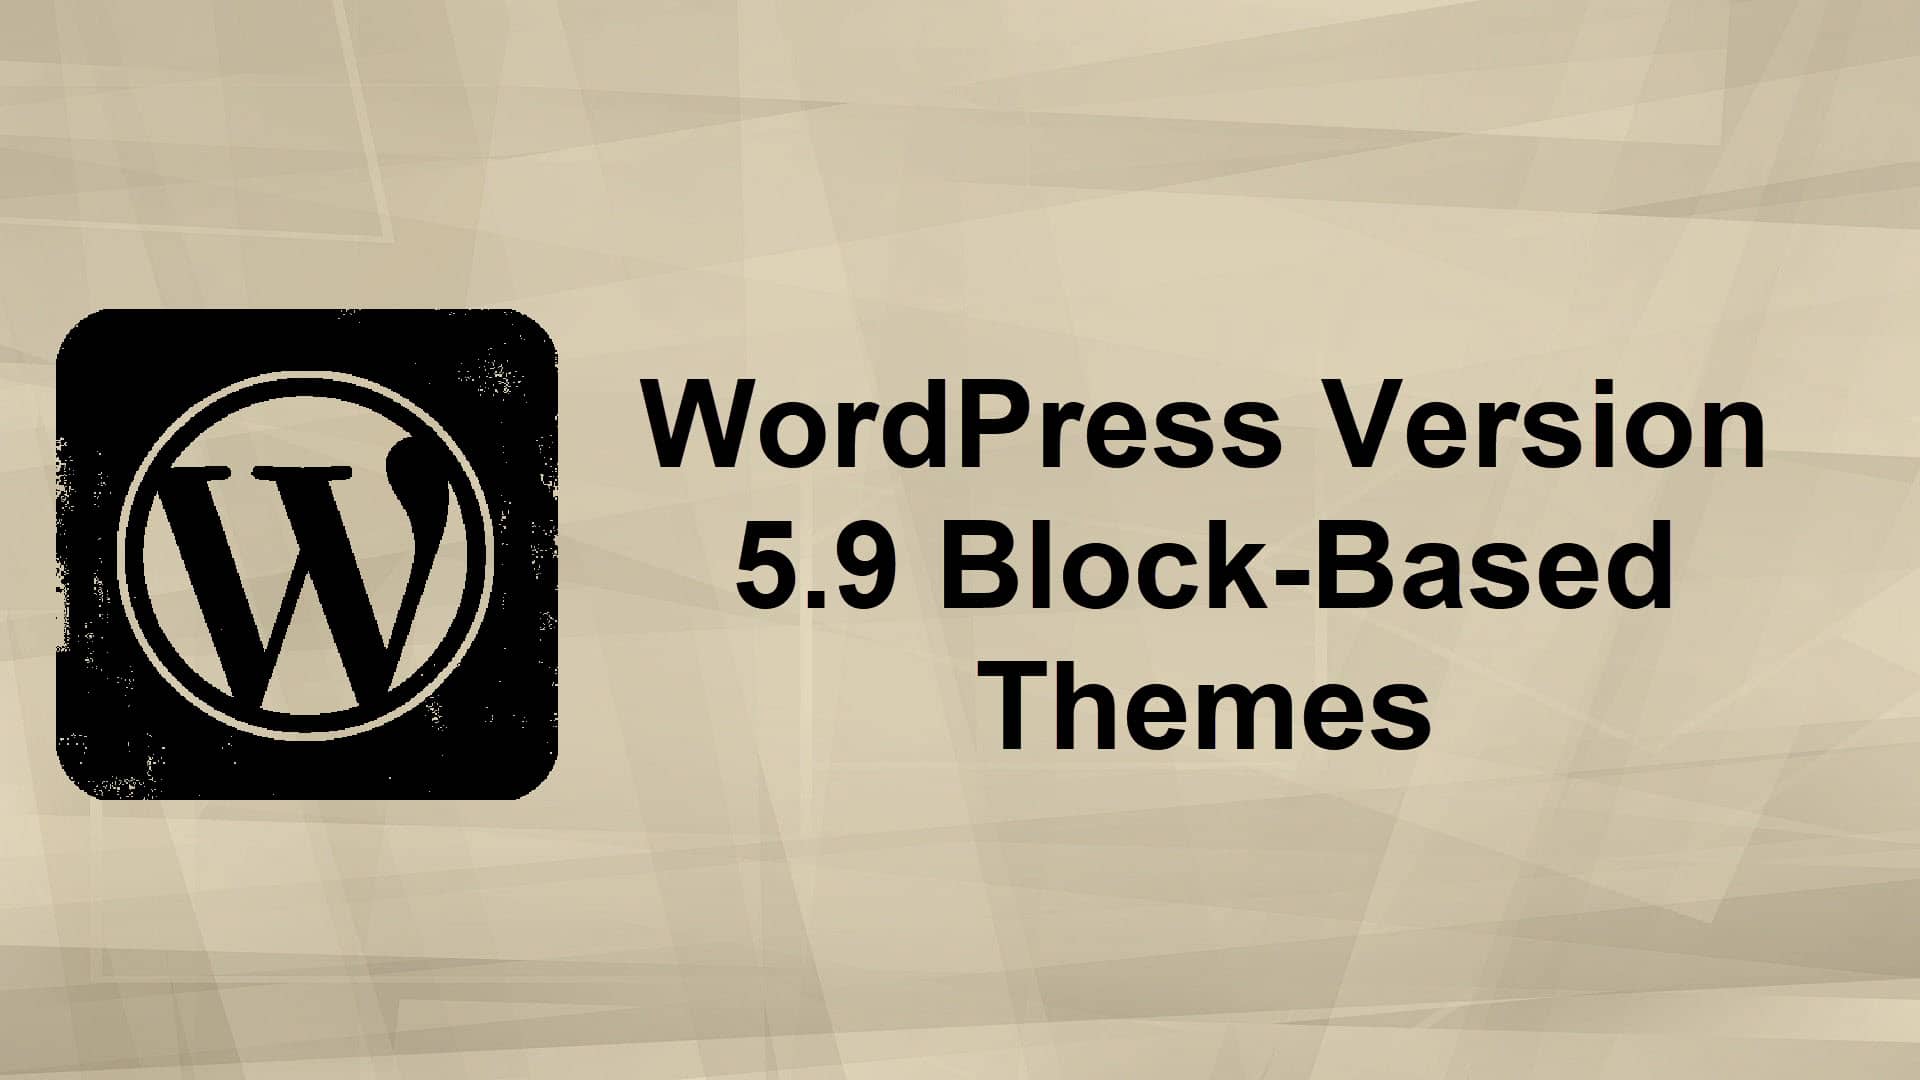 What's New In WordPress 5.9 Block-Based Themes Featured